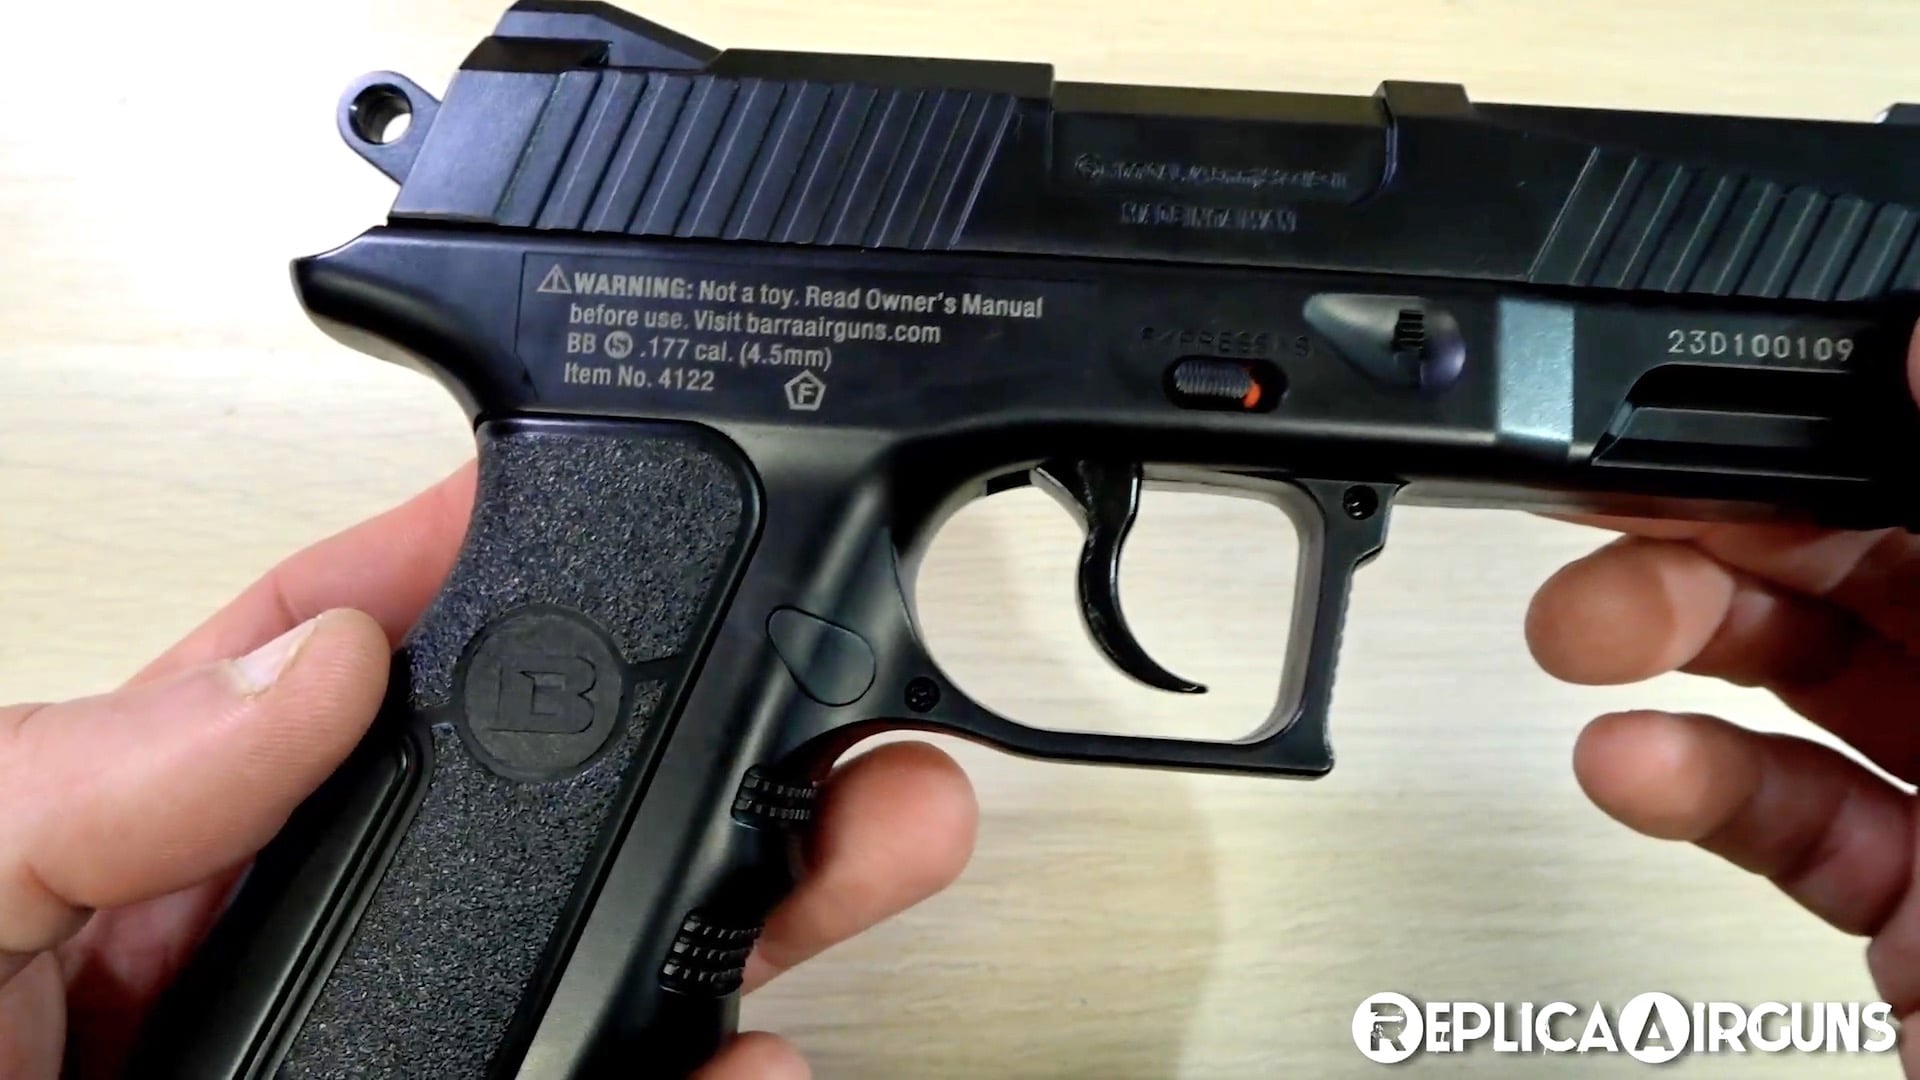 Bear River BR45 NBB CO2 BB Pistol Table Top Review